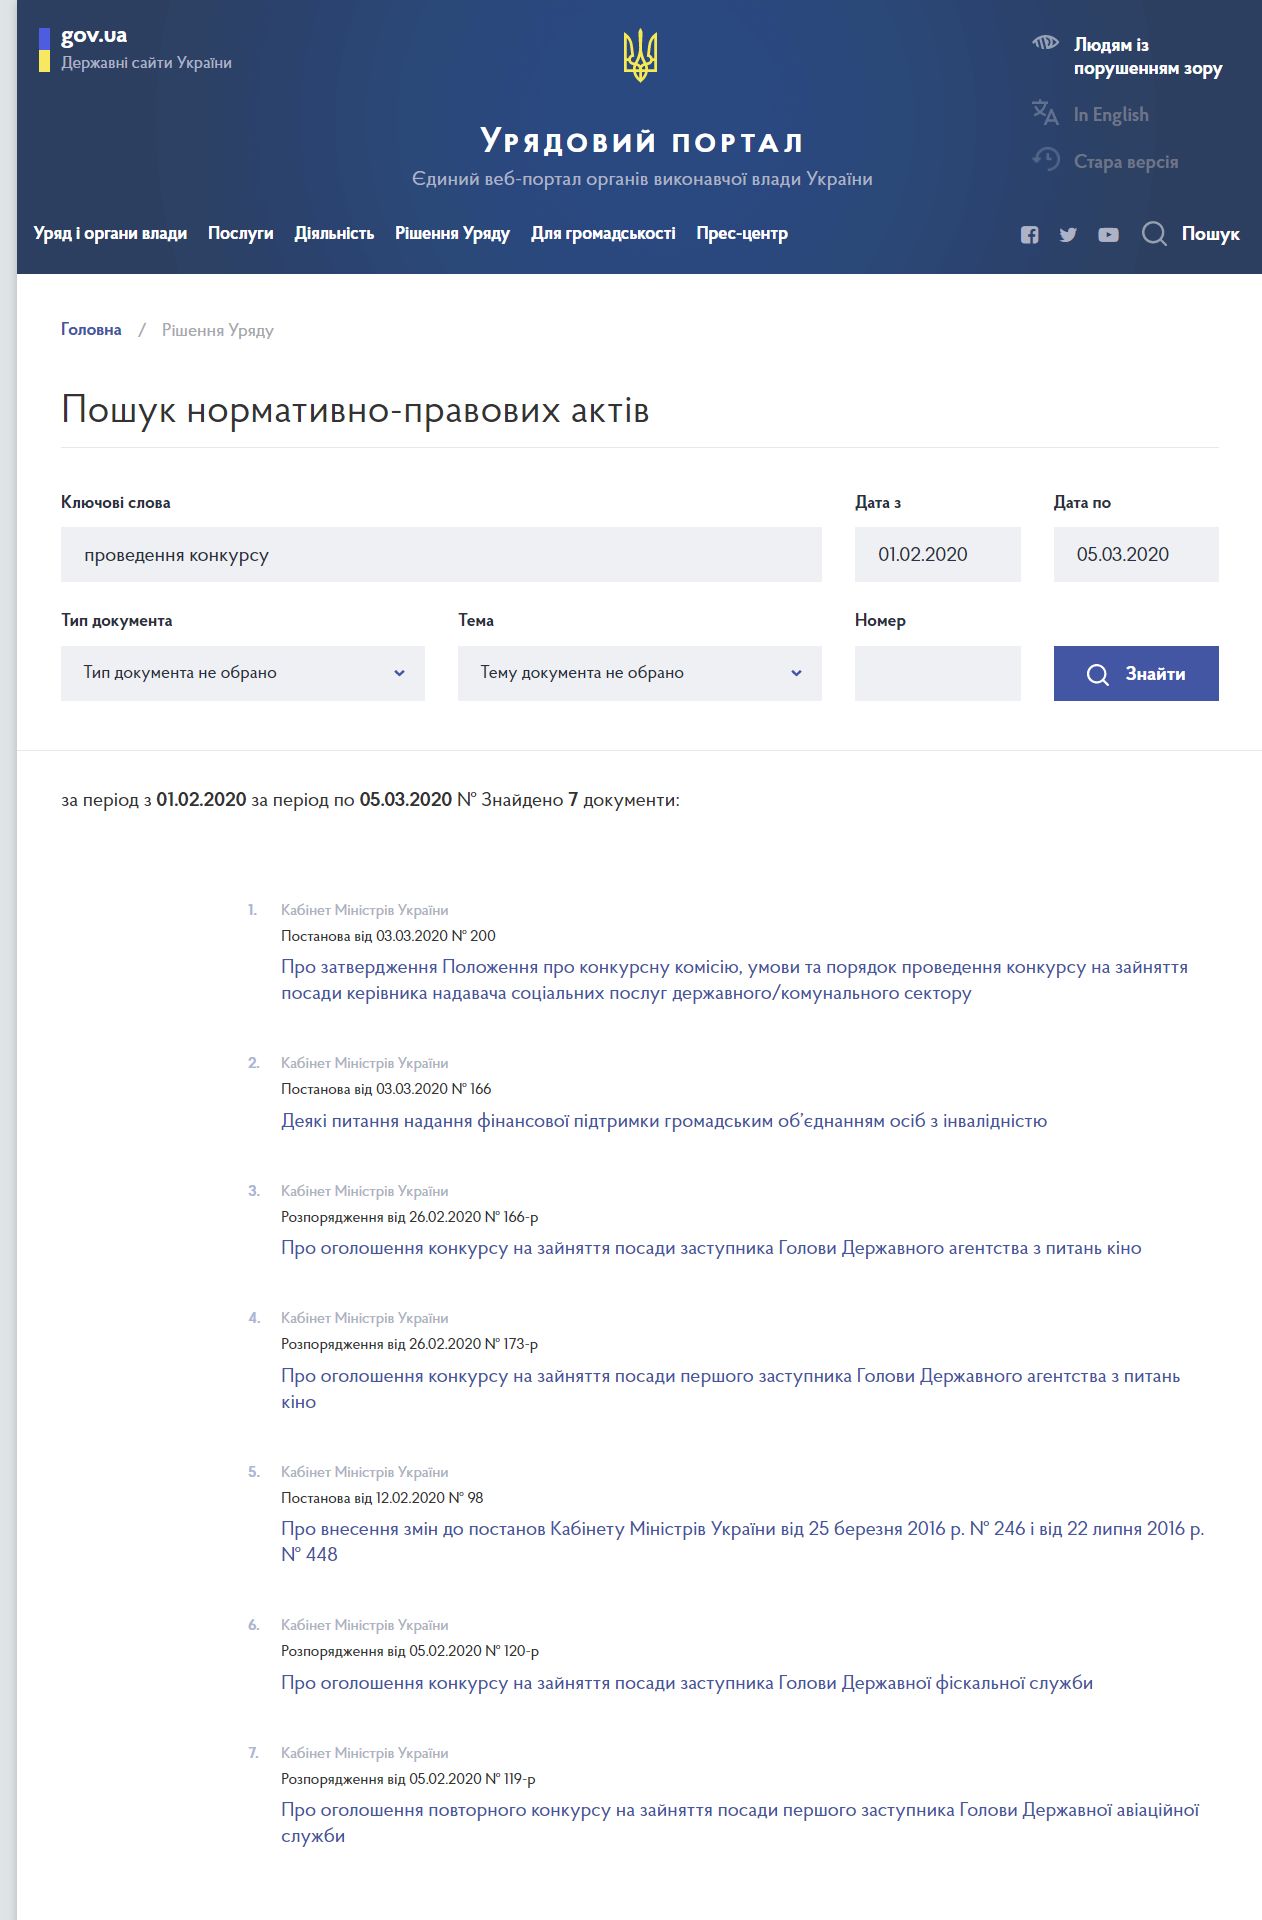 https://www.kmu.gov.ua/npasearch?&key=%D0%BF%D1%80%D0%BE%D0%B2%D0%B5%D0%B4%D0%B5%D0%BD%D0%BD%D1%8F%20%D0%BA%D0%BE%D0%BD%D0%BA%D1%83%D1%80%D1%81%D1%83&from=01.02.2020&to=05.03.2020